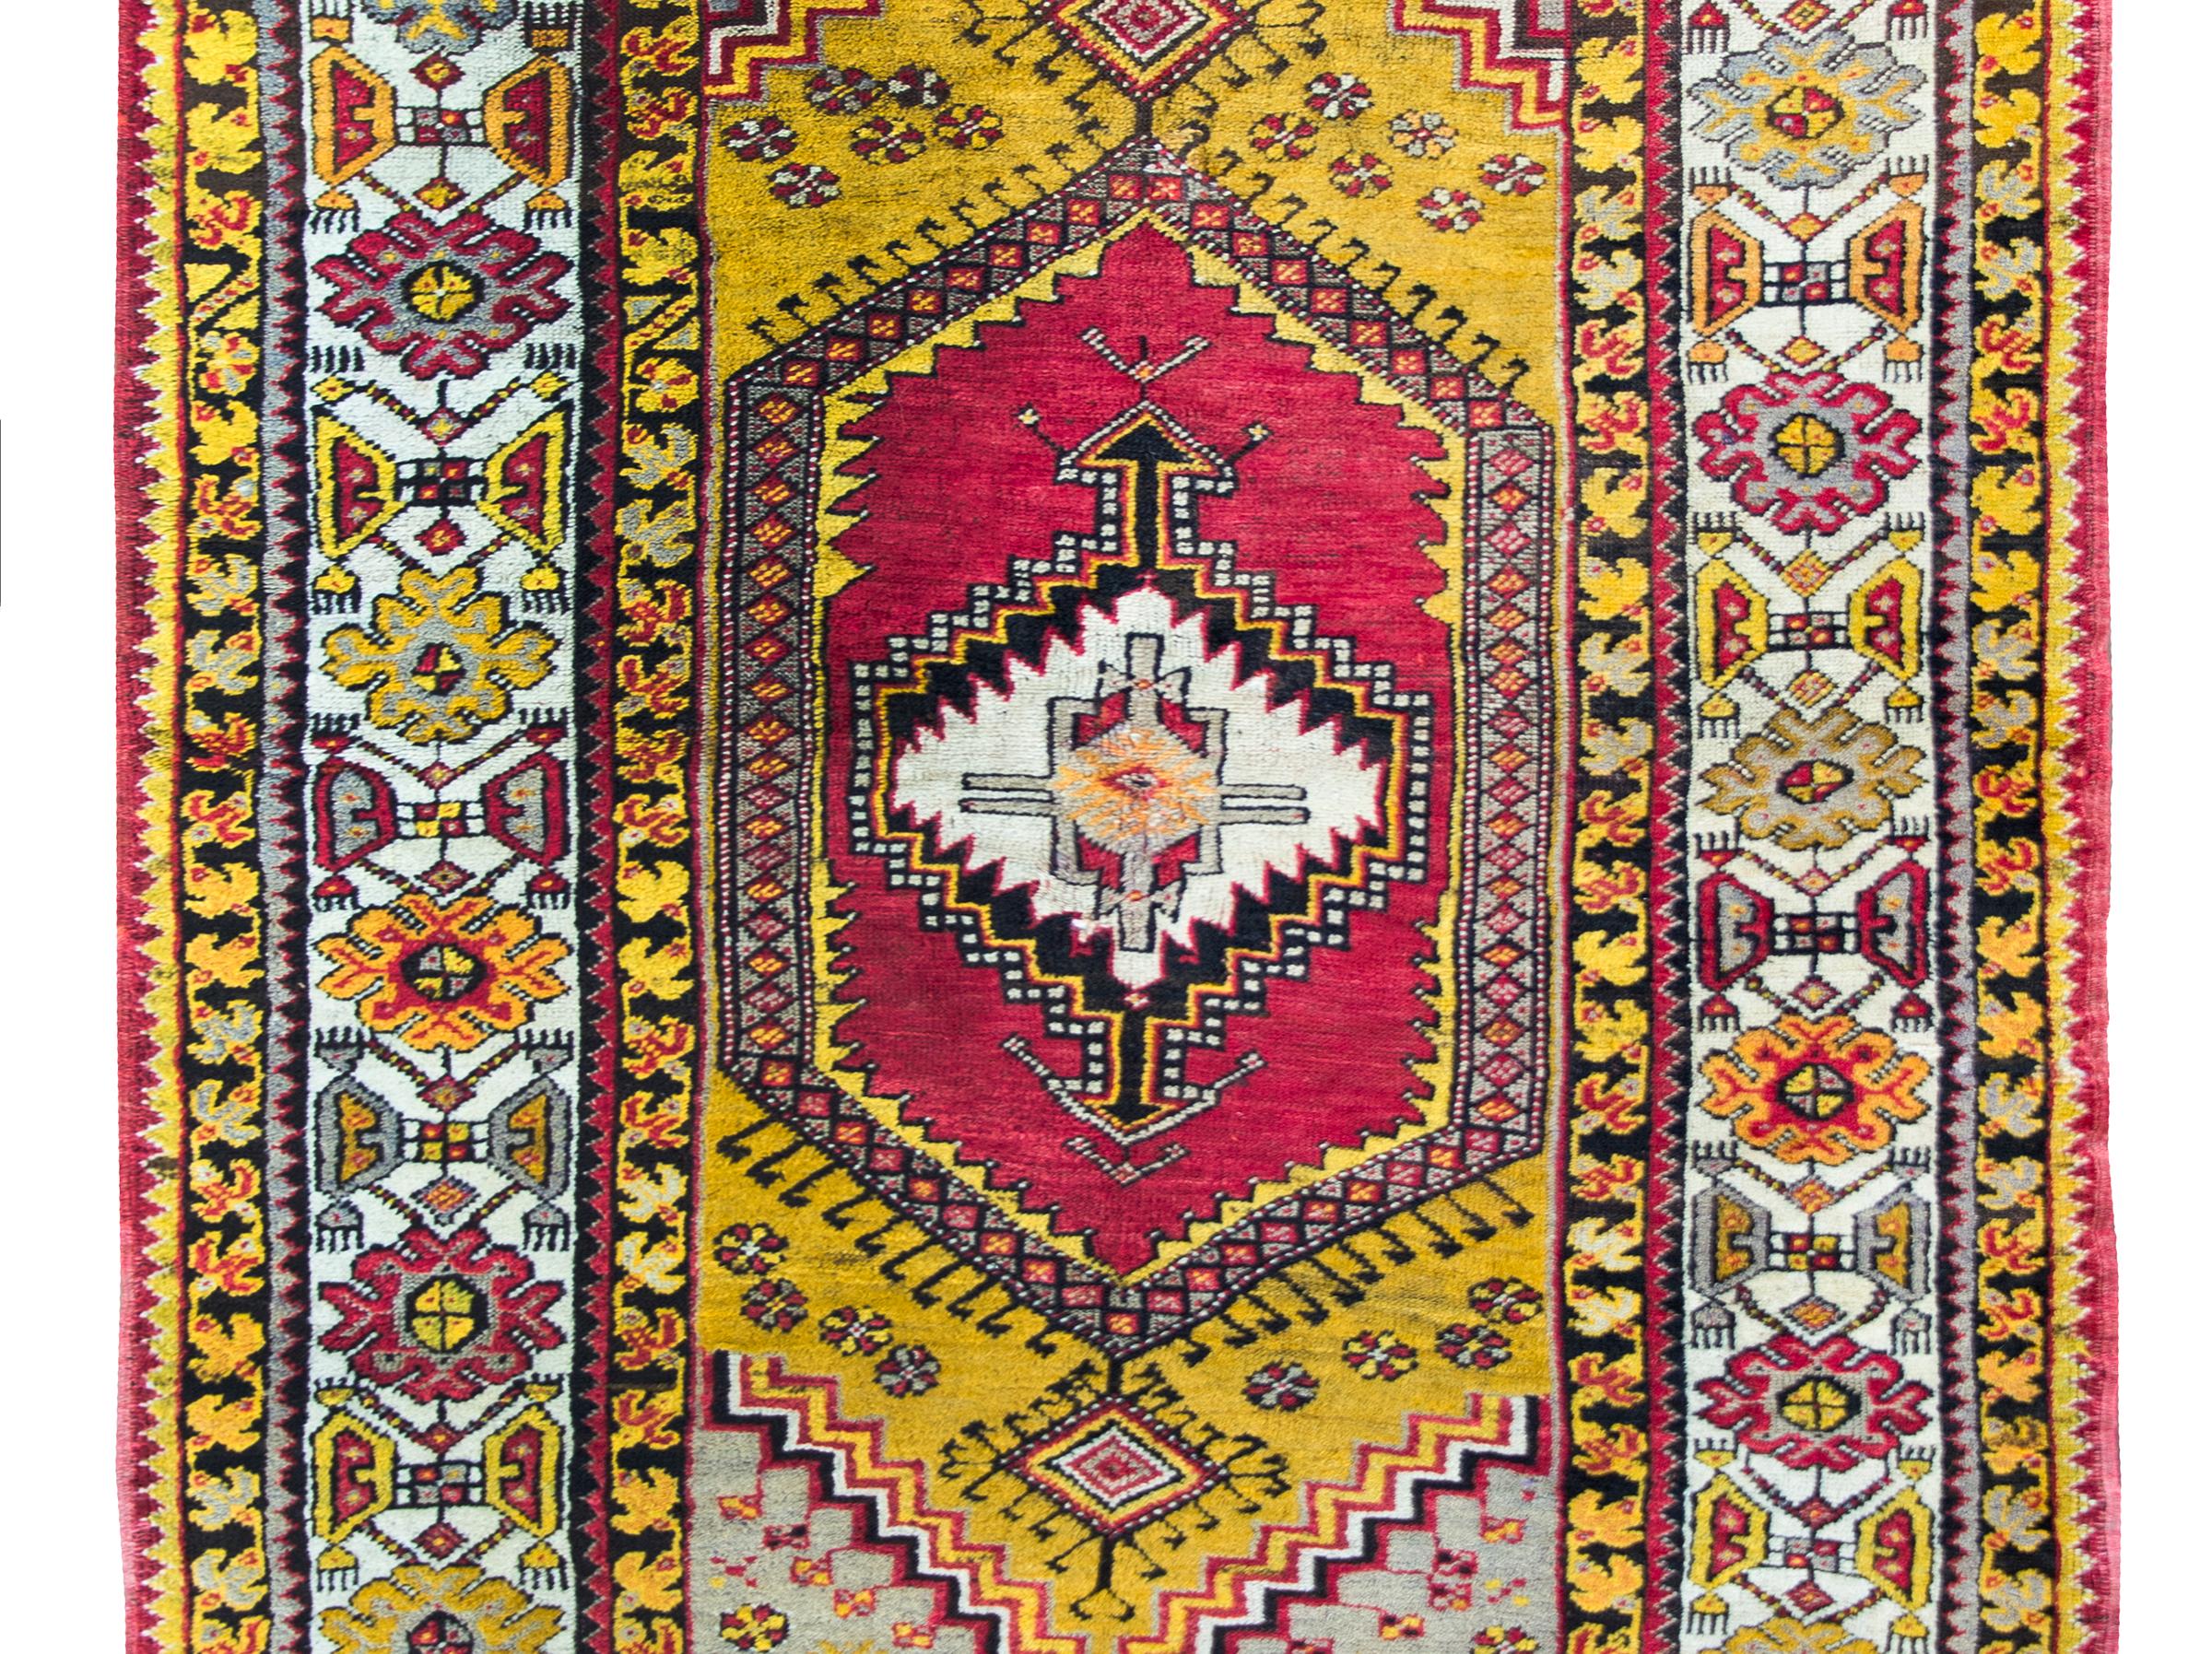 A bold and brilliant early 20th century Turkish Konya rug with a tribal pattern containing a central geometric medallion living amidst a field of more geometric stylized floral patterns, and all surrounded by a wonderful border with repeated